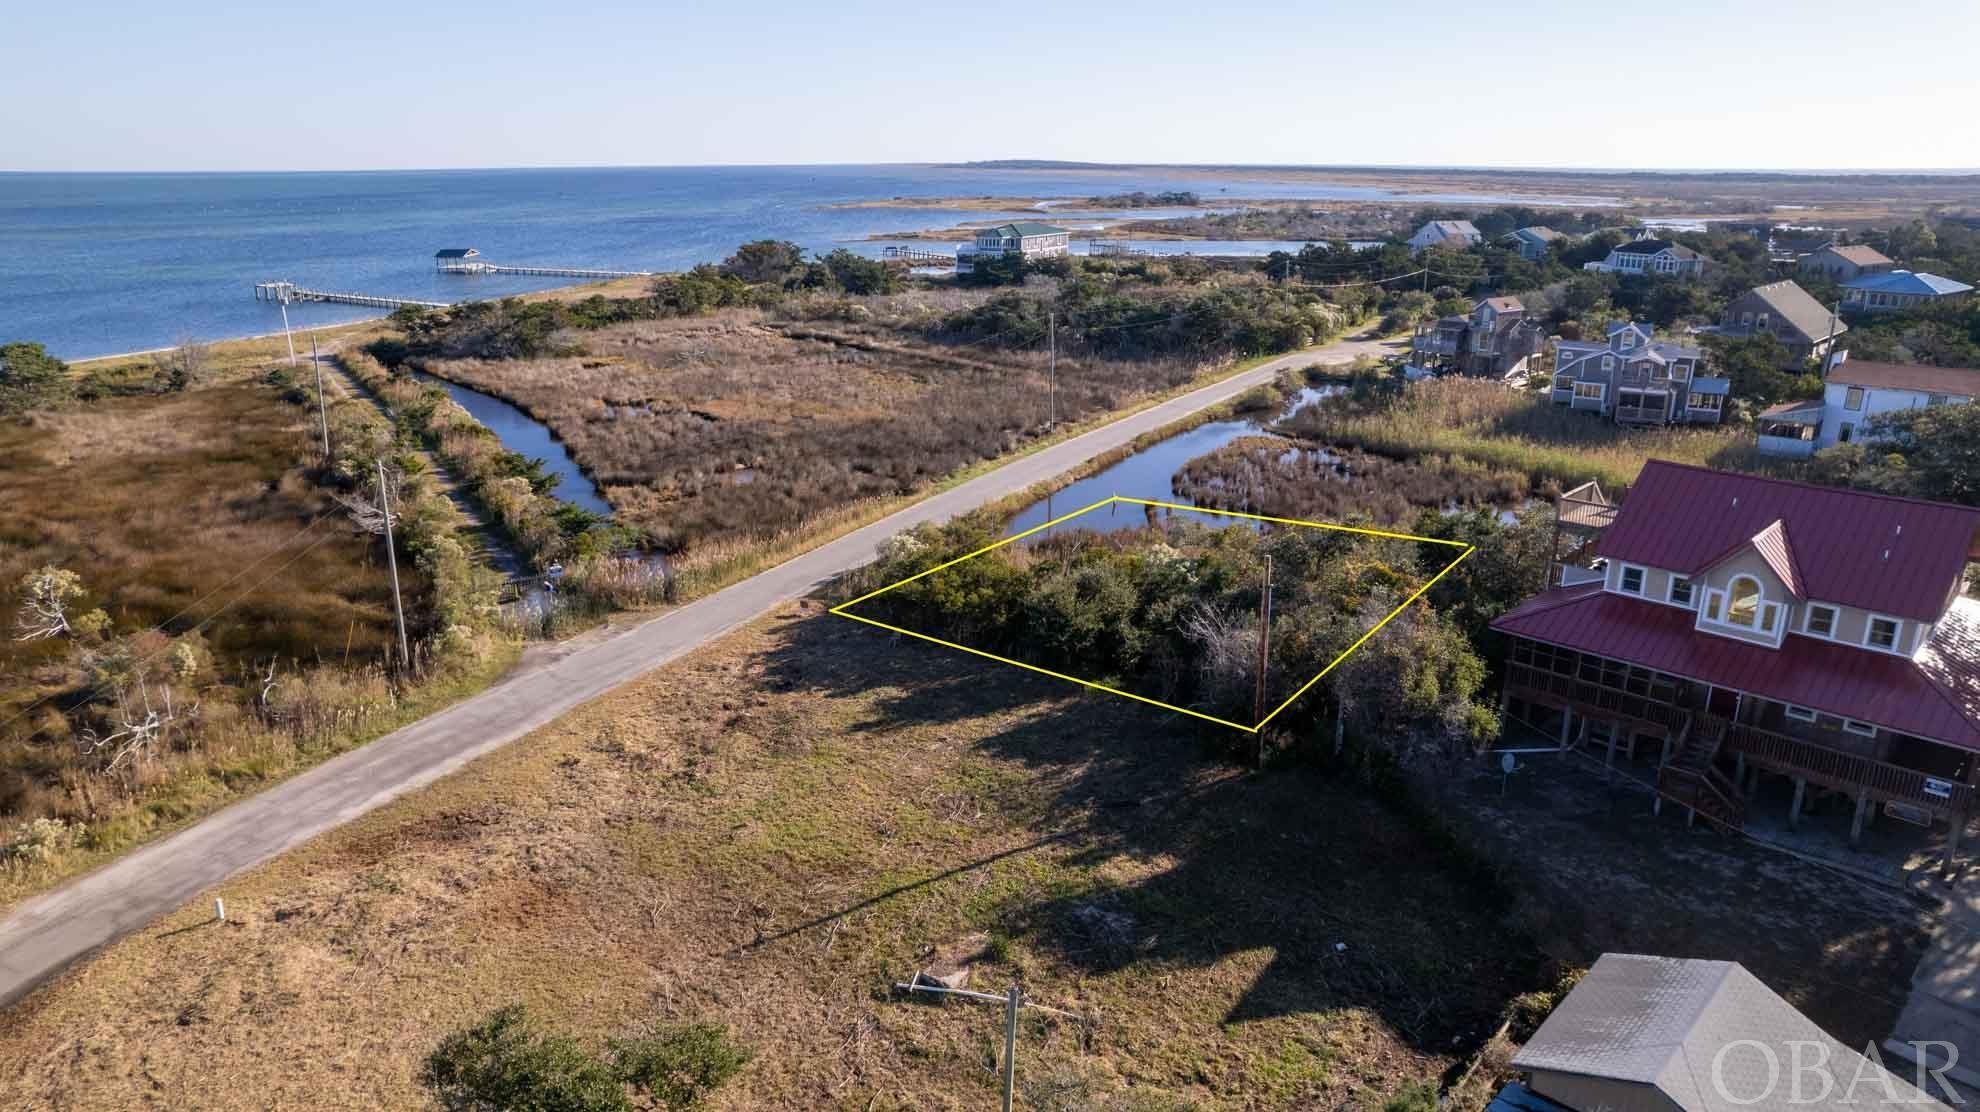 176 ONeal Drive, Ocracoke, NC 27960, ,Lots/land,For sale,ONeal Drive,123775